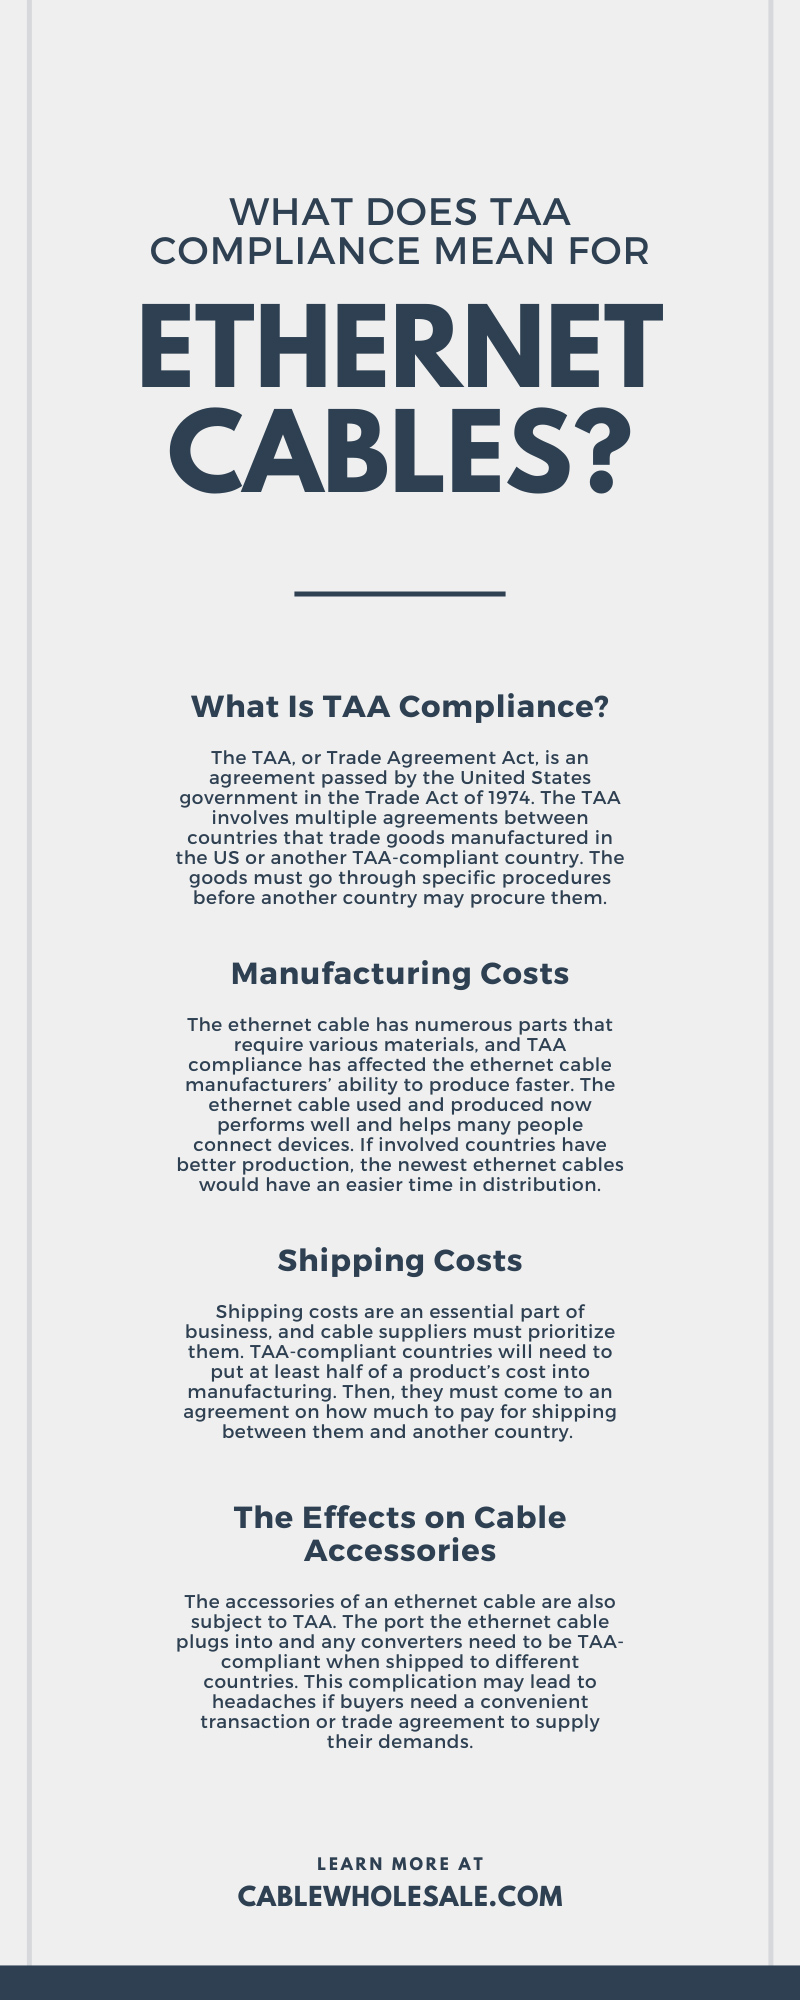 What Does TAA Compliance Mean for Ethernet Cables?